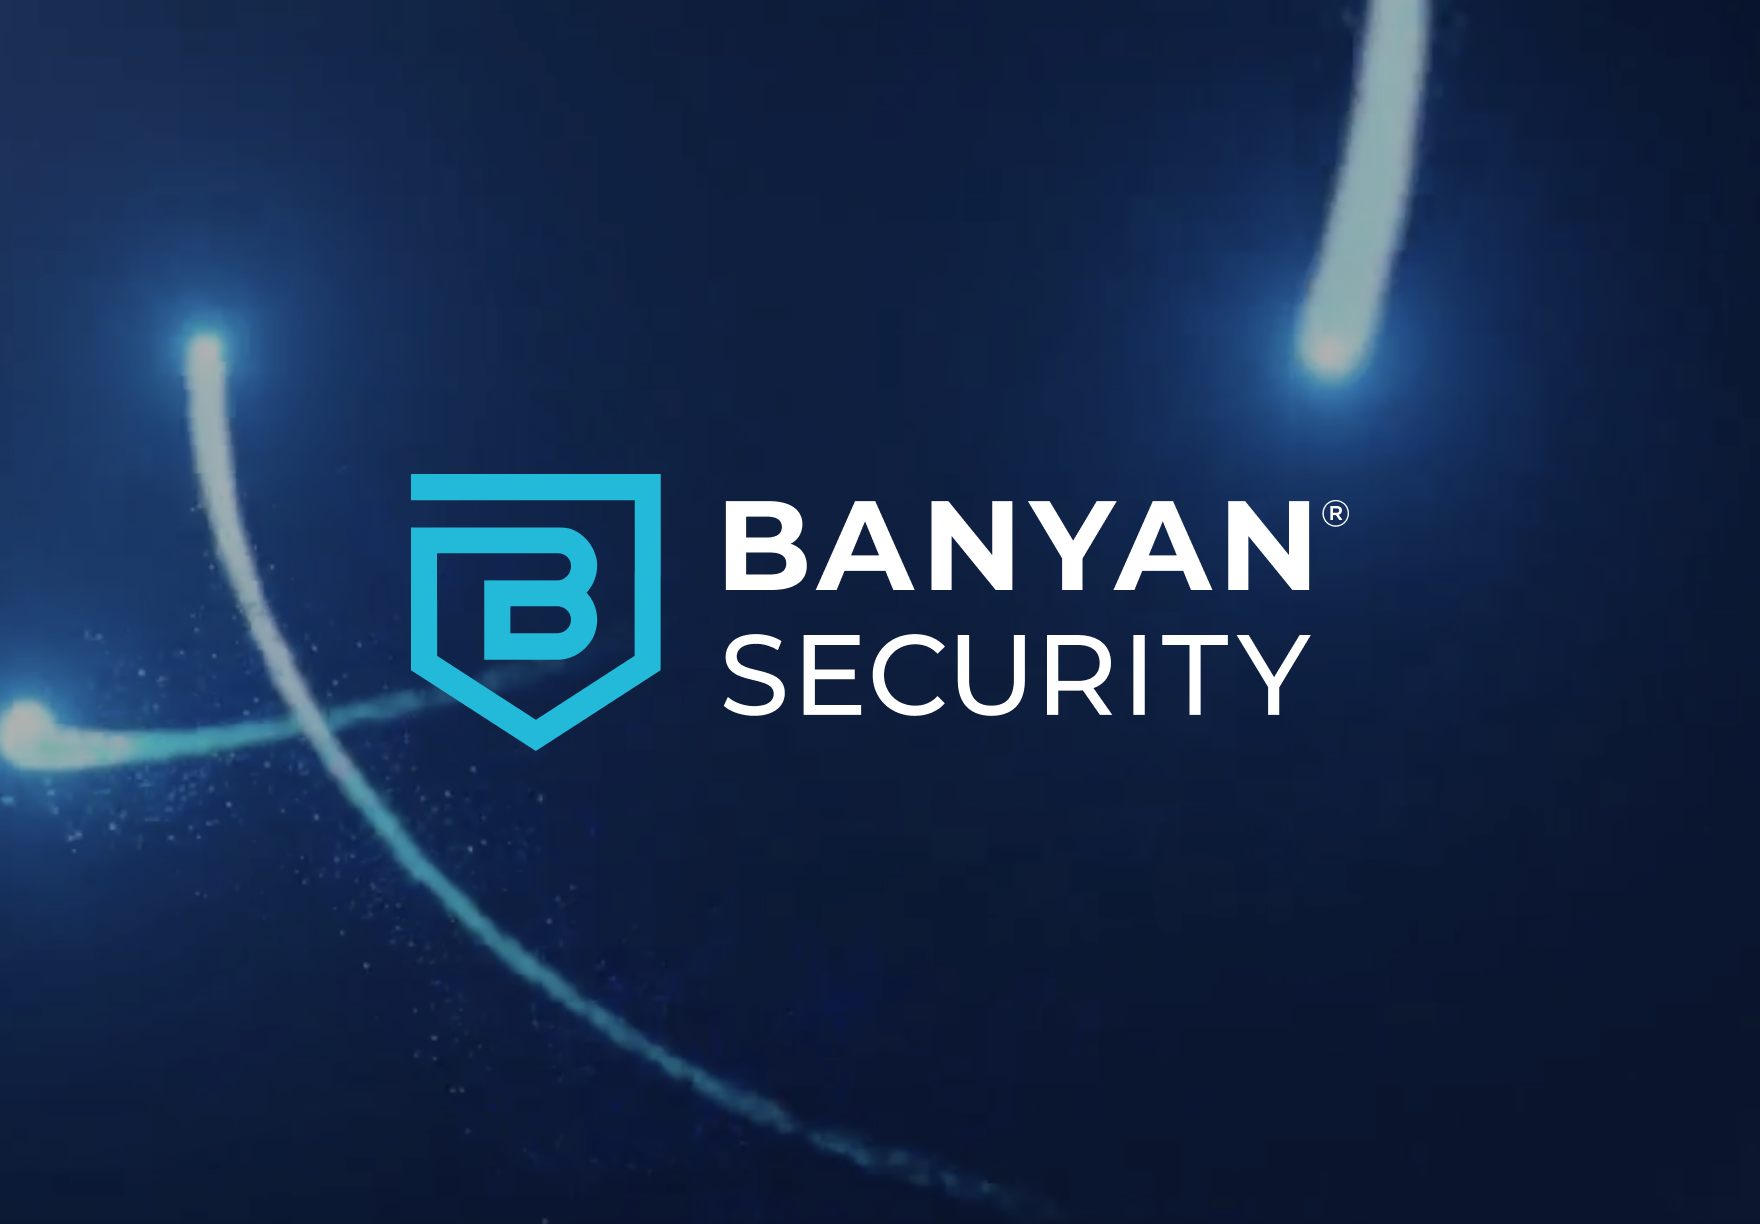 https://images.ctfassets.net/8naaccf28y0f/ag7xaQPSmFU92cIxqekpu/77574aa5e96e663bf488526f1a5d0d6b/Hero_Customer_Story-BanyanSecurity.png